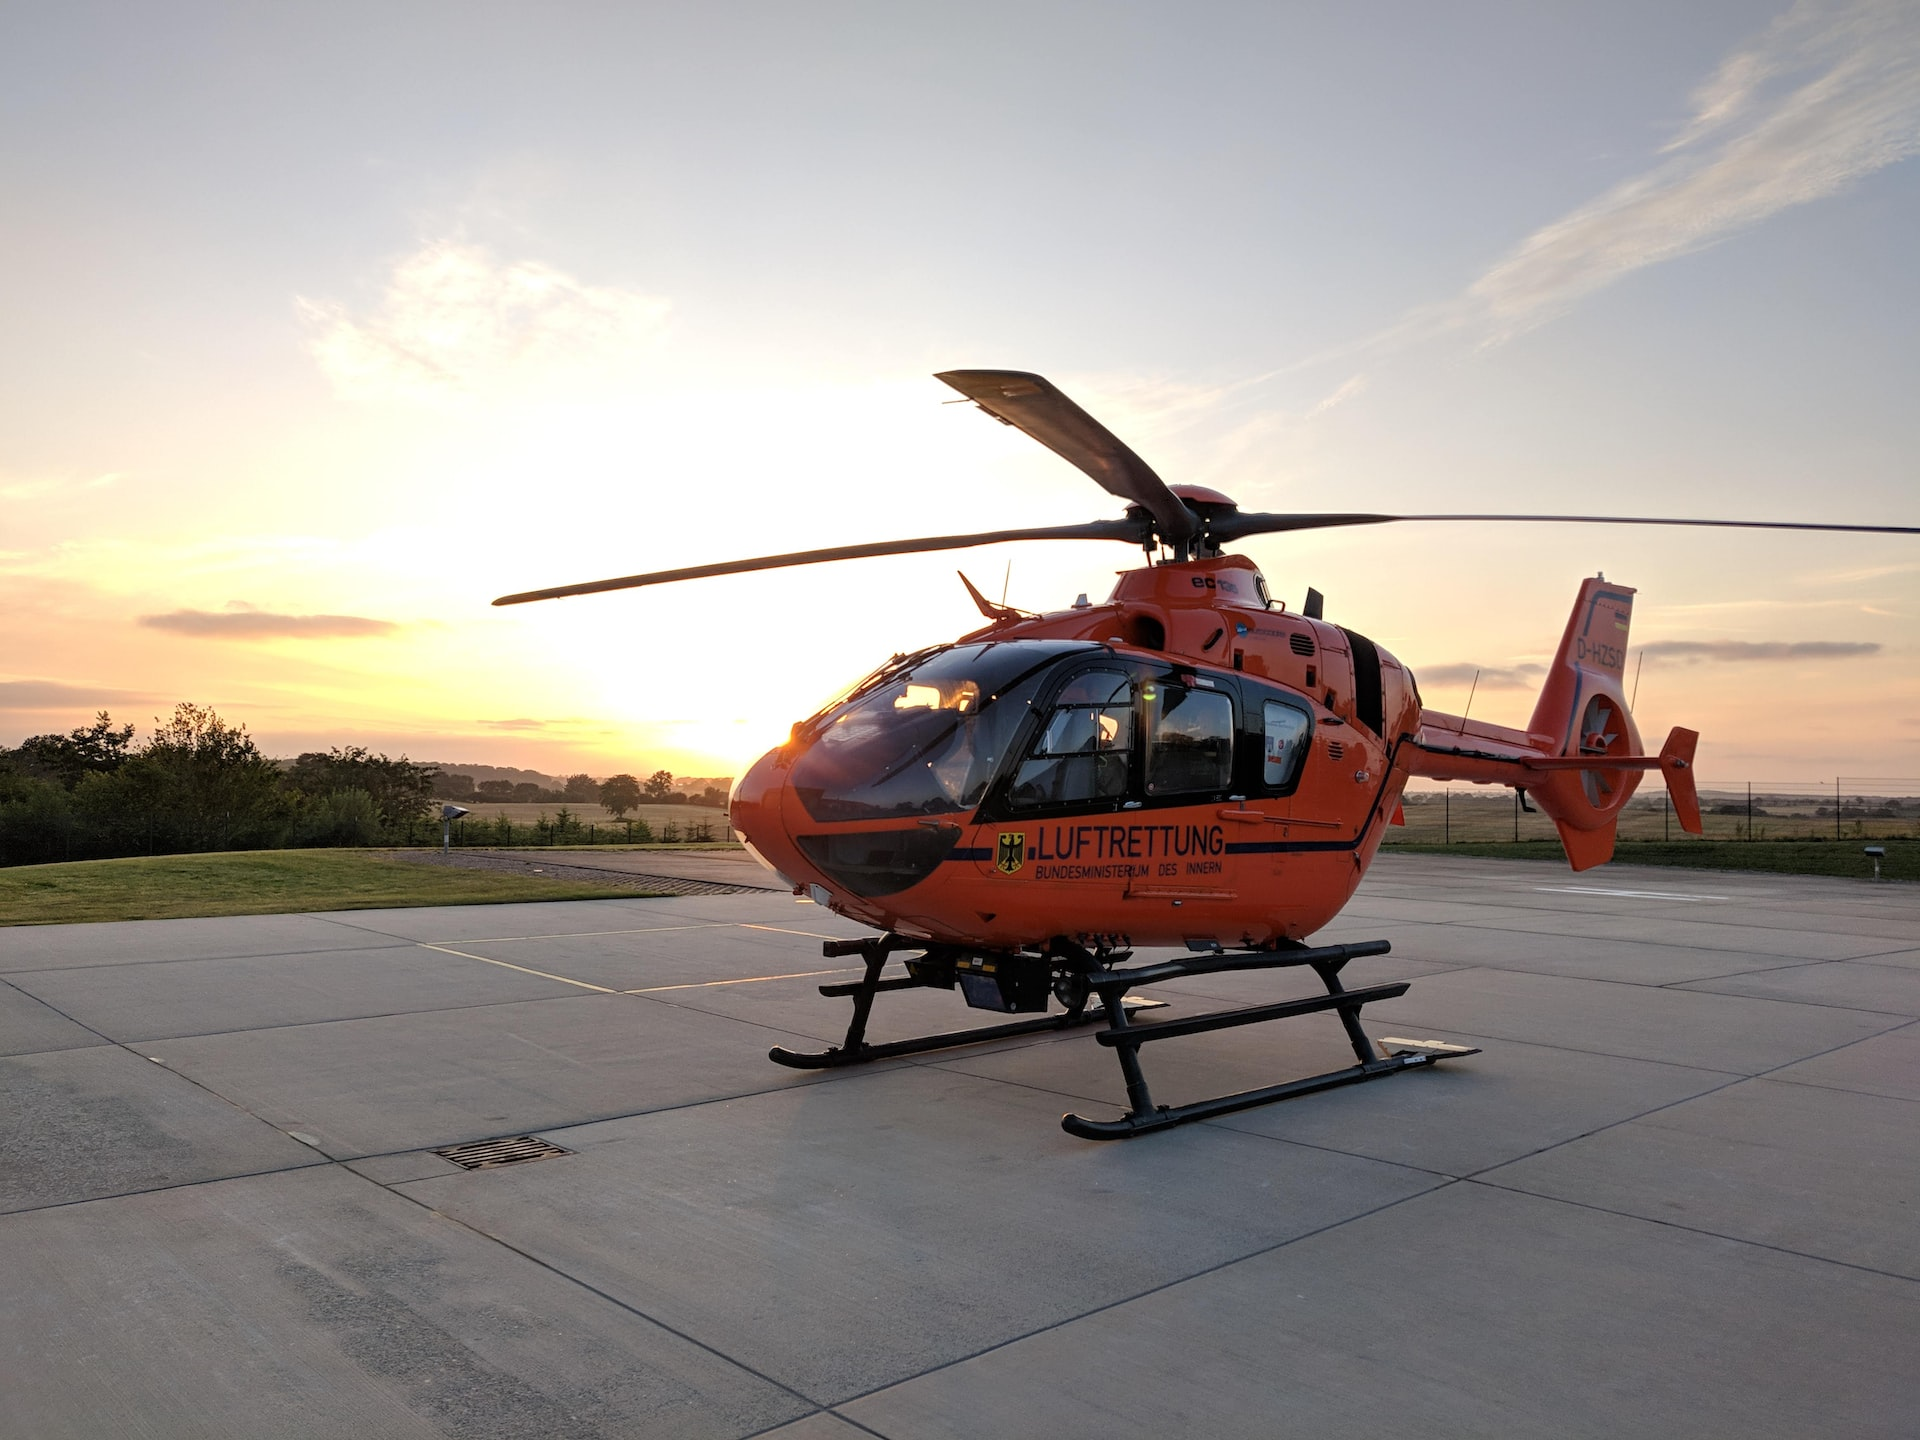 An air rescue helicopter stationed on a helipad in sunset.